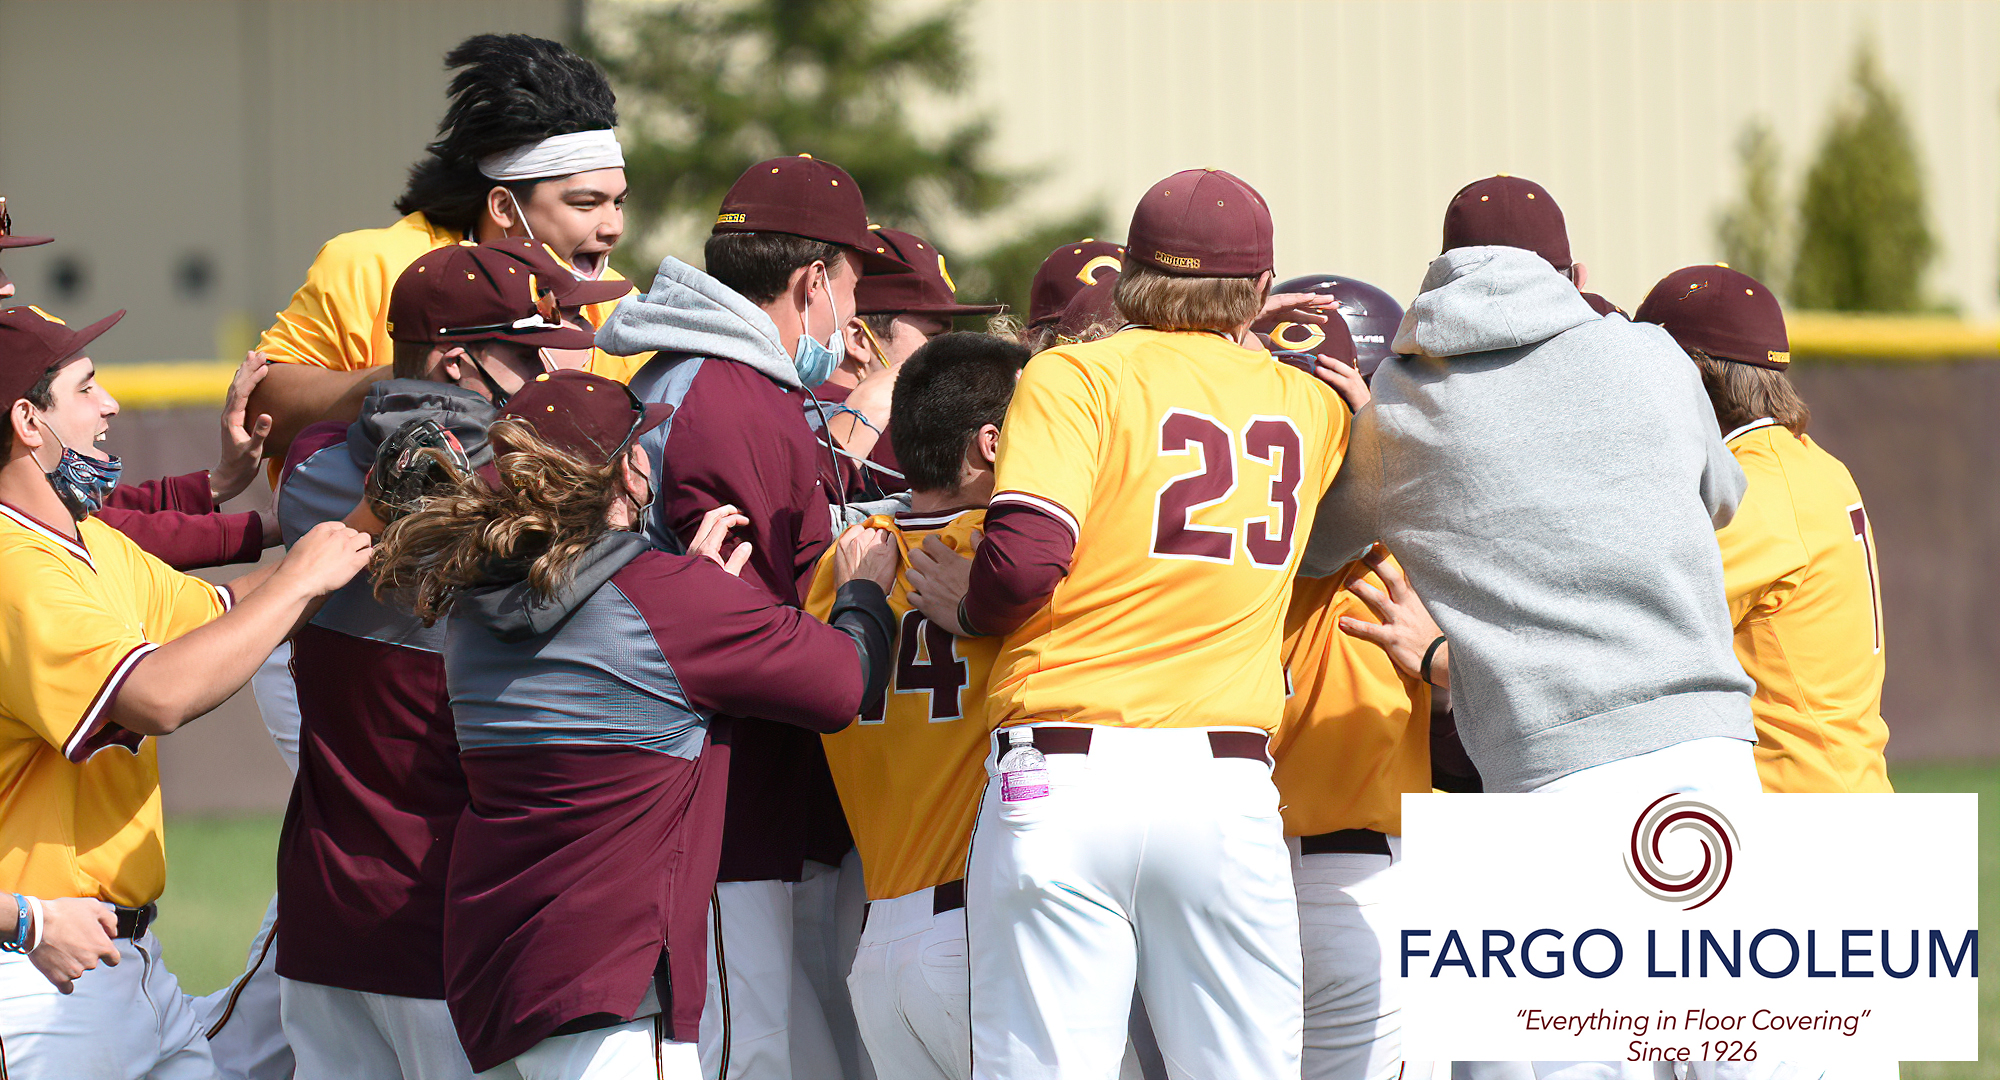 Concordia overcame a 6-0 deficit, scored eight unanswered runs and beat St. Olaf 8-6 in the first game of the best-of-three series in the MIAC Round of 12.